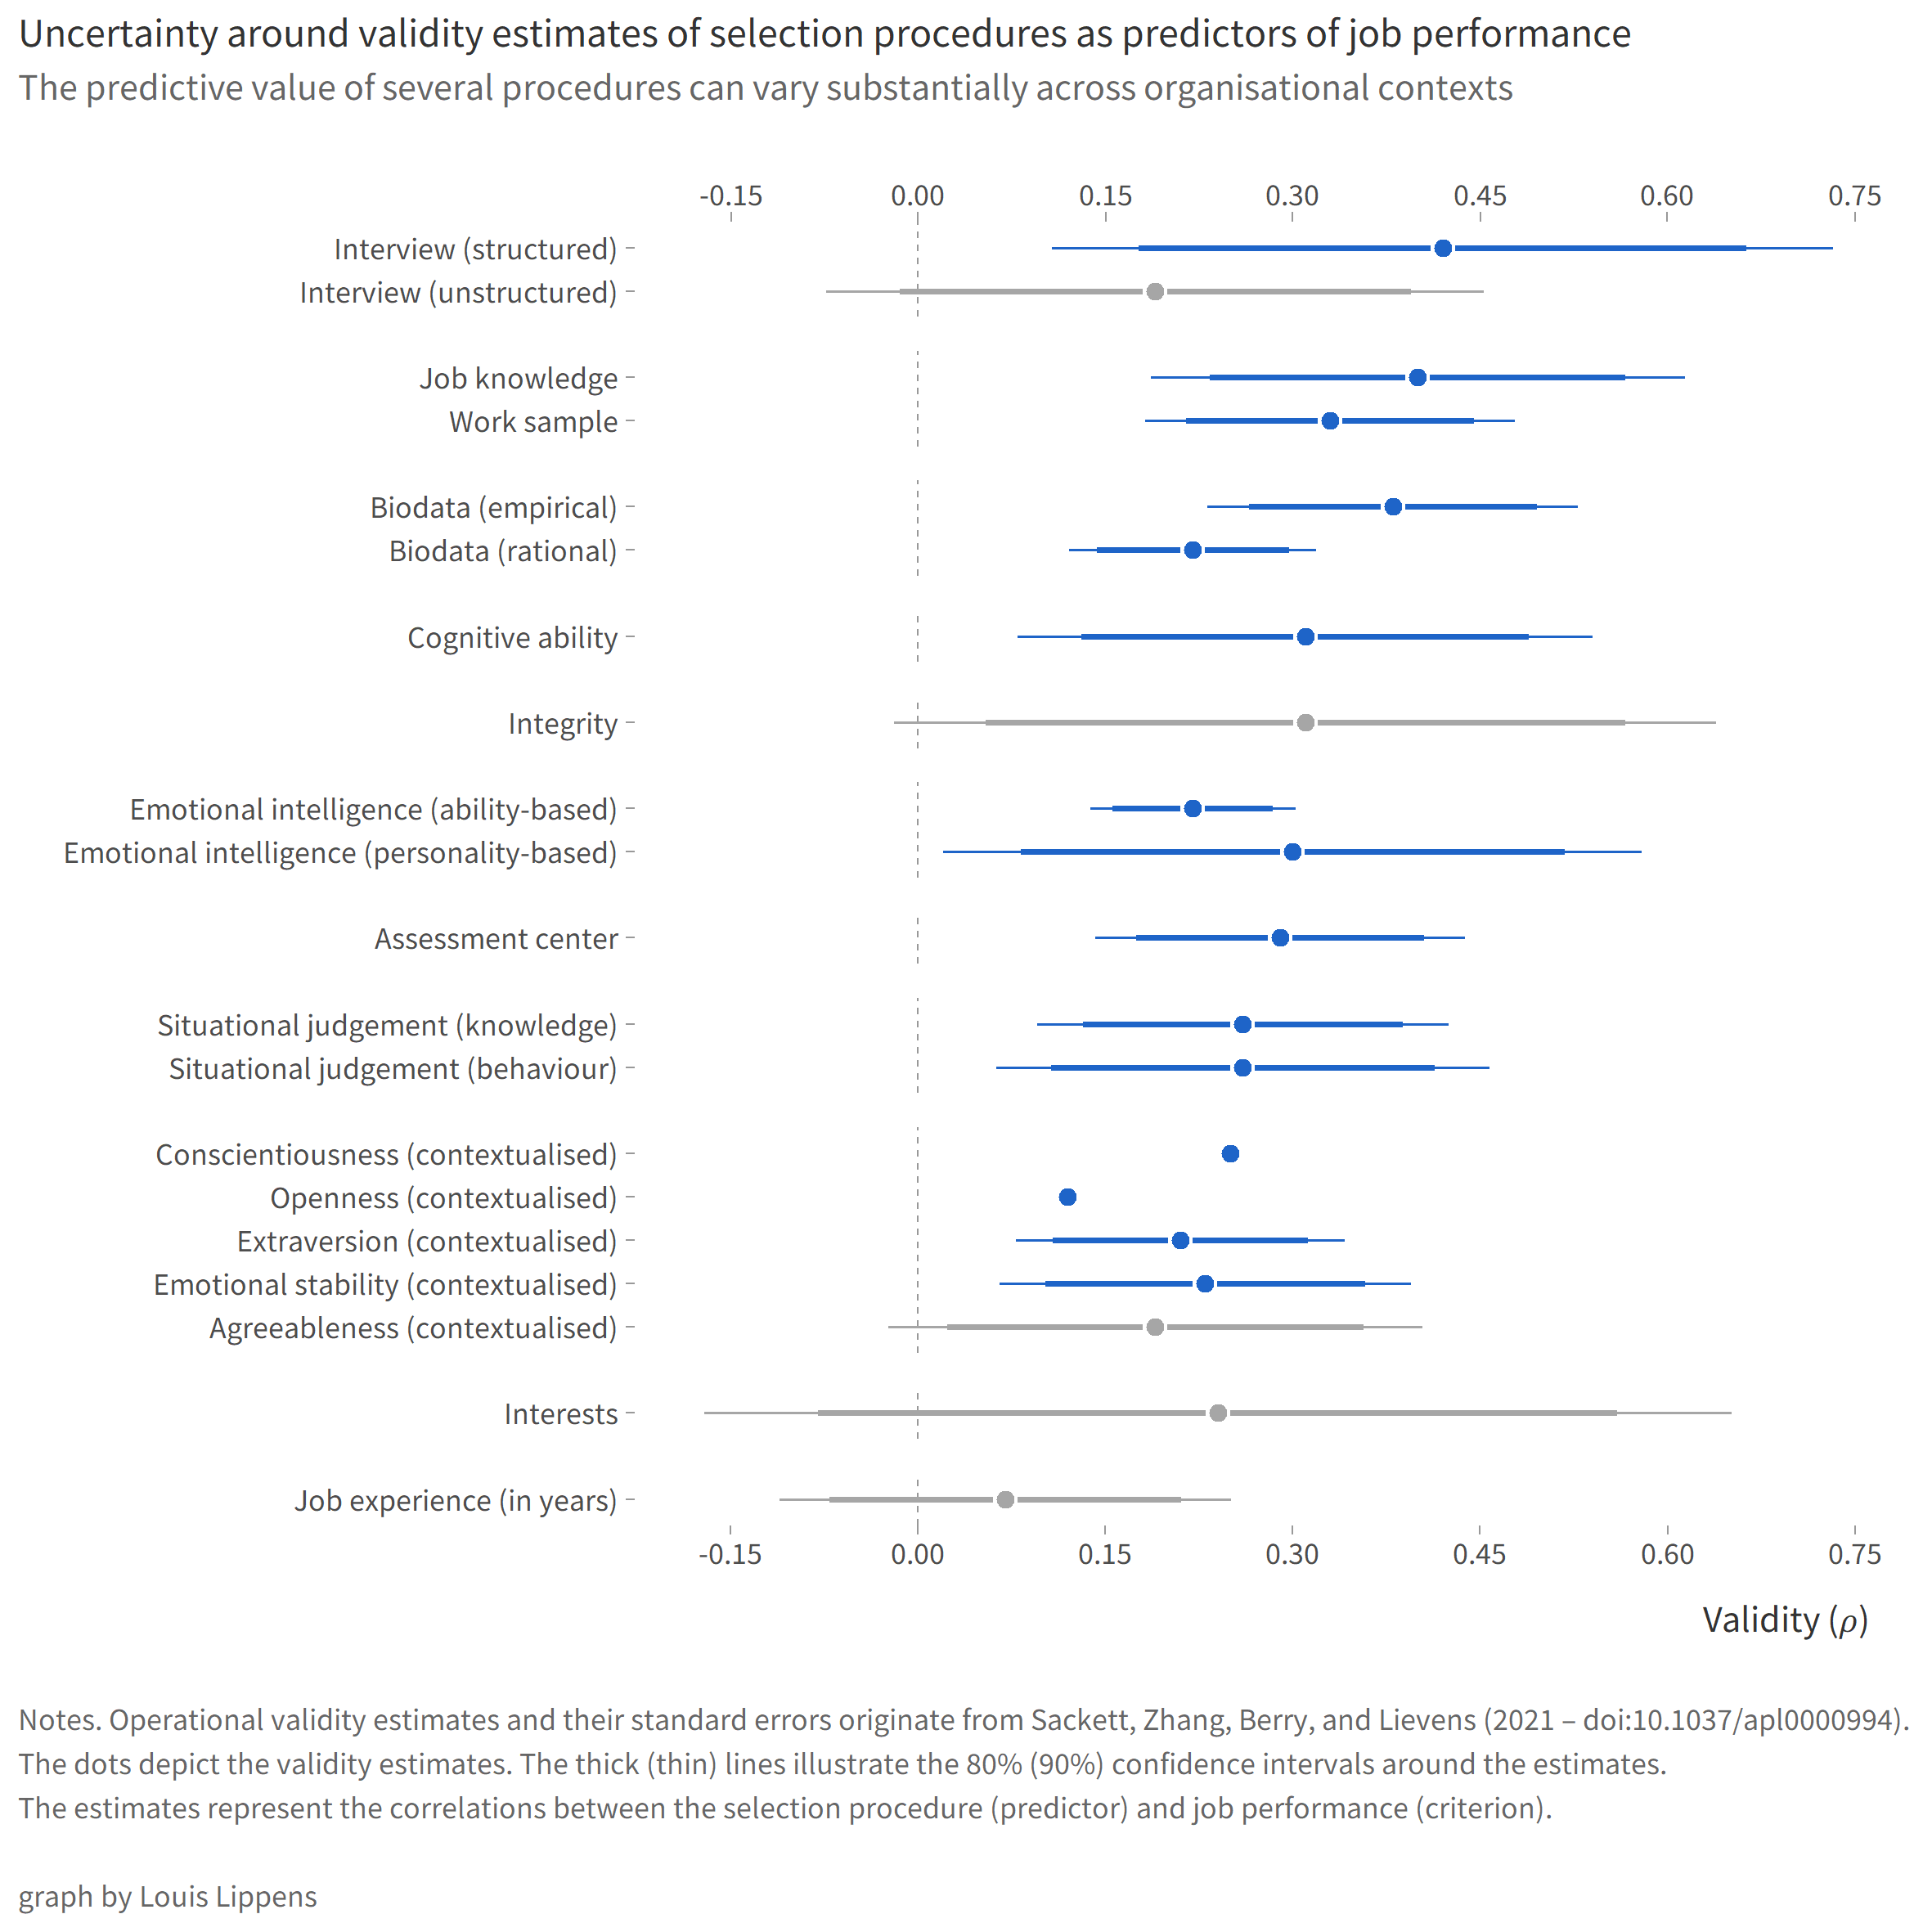 Graph showing the uncertainty around validity estimates of selection procedures as predictors of job performance. The predictive value of several procedures can vary substantially across organisational contexts.